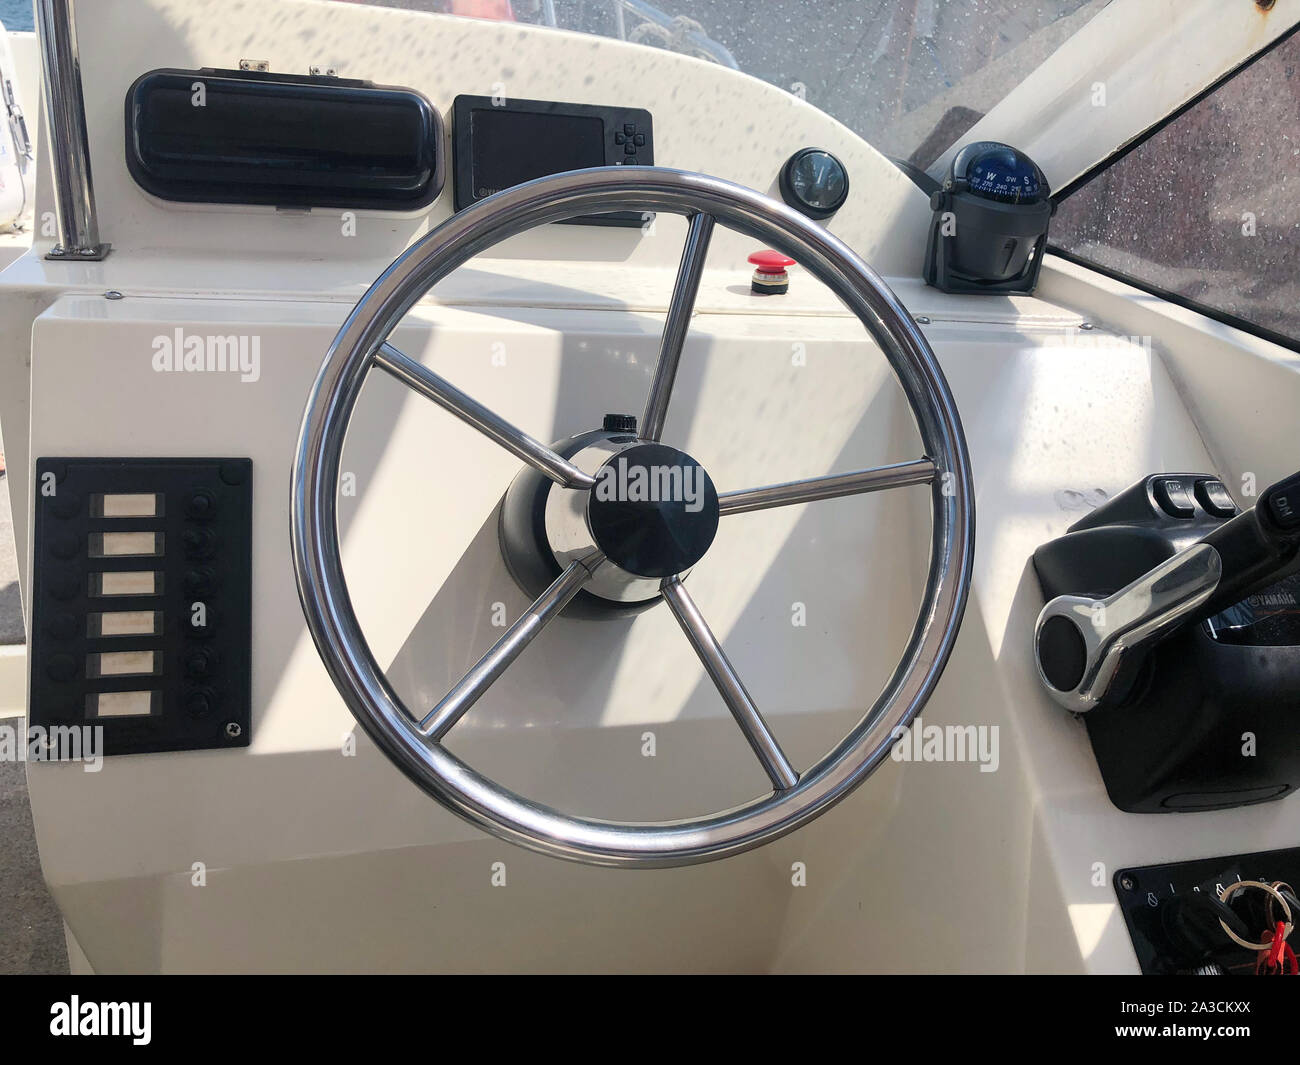 View of yacht cockpit on the deck. The helm of the sea boat, motor boat, coast guard, saving lives. Stock Photo